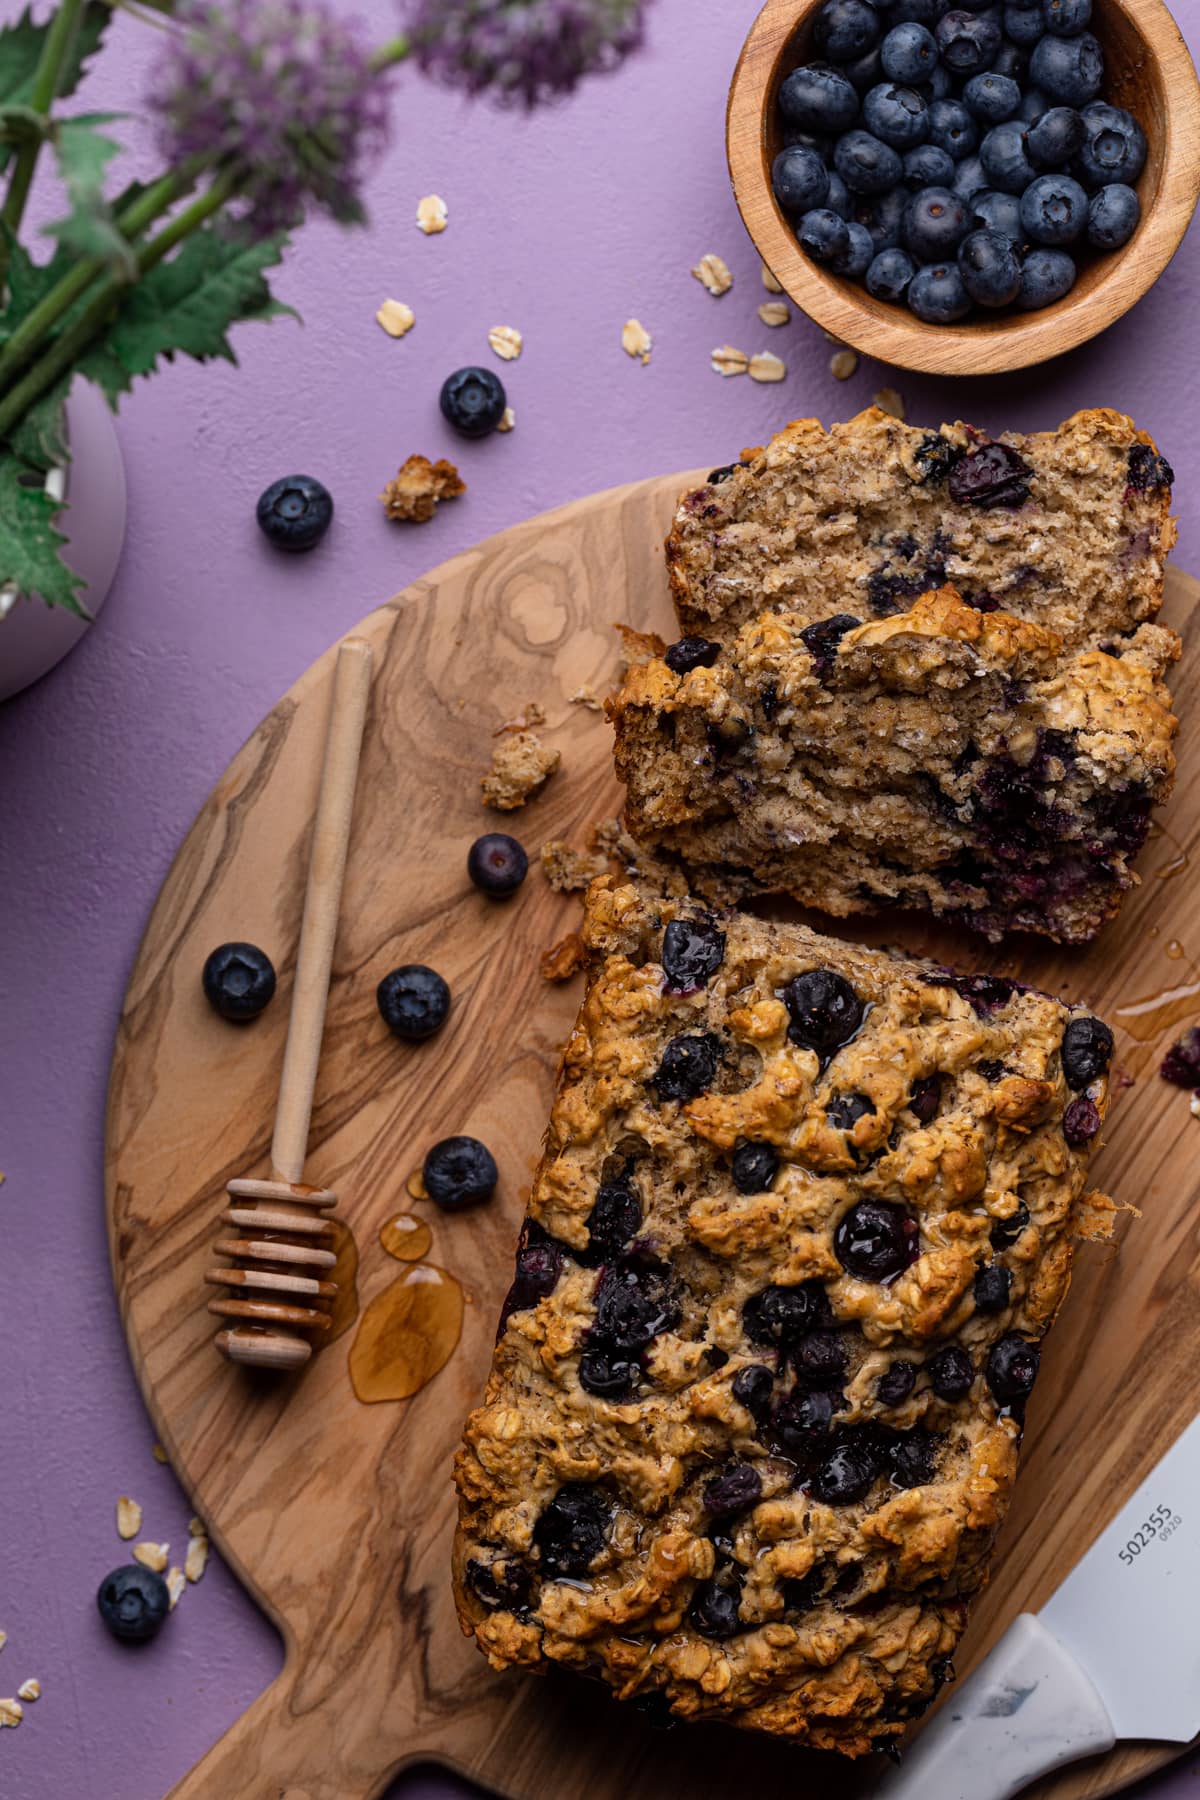 Blueberry Oatmeal Breakfast Bread cut into slices with fresh blueberries.